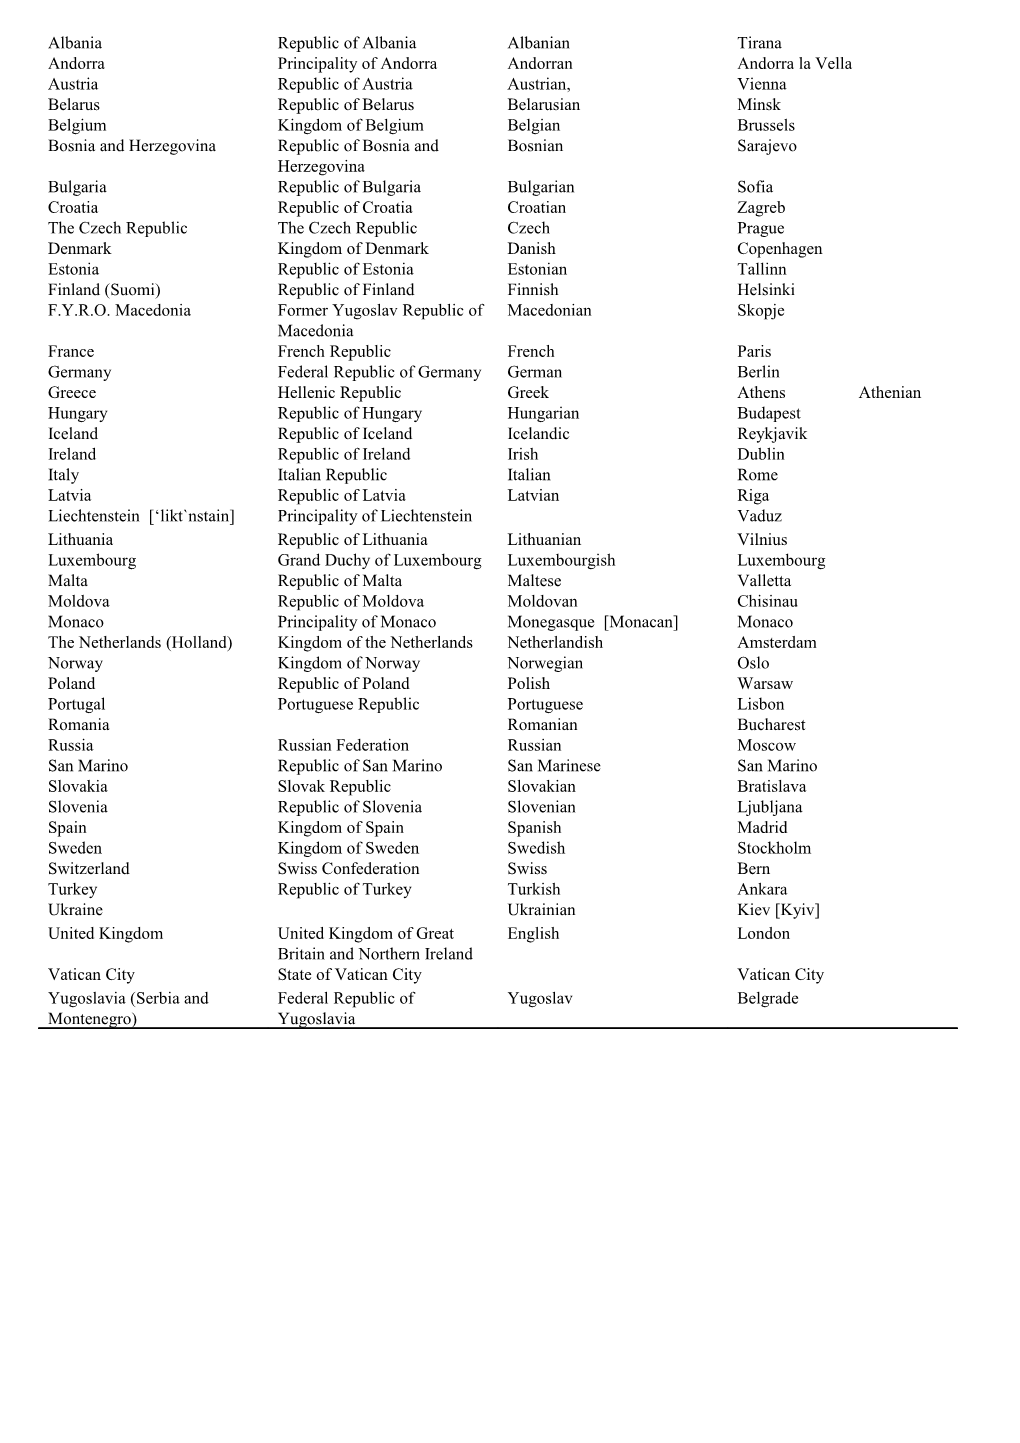 Table of Countries and Capitals